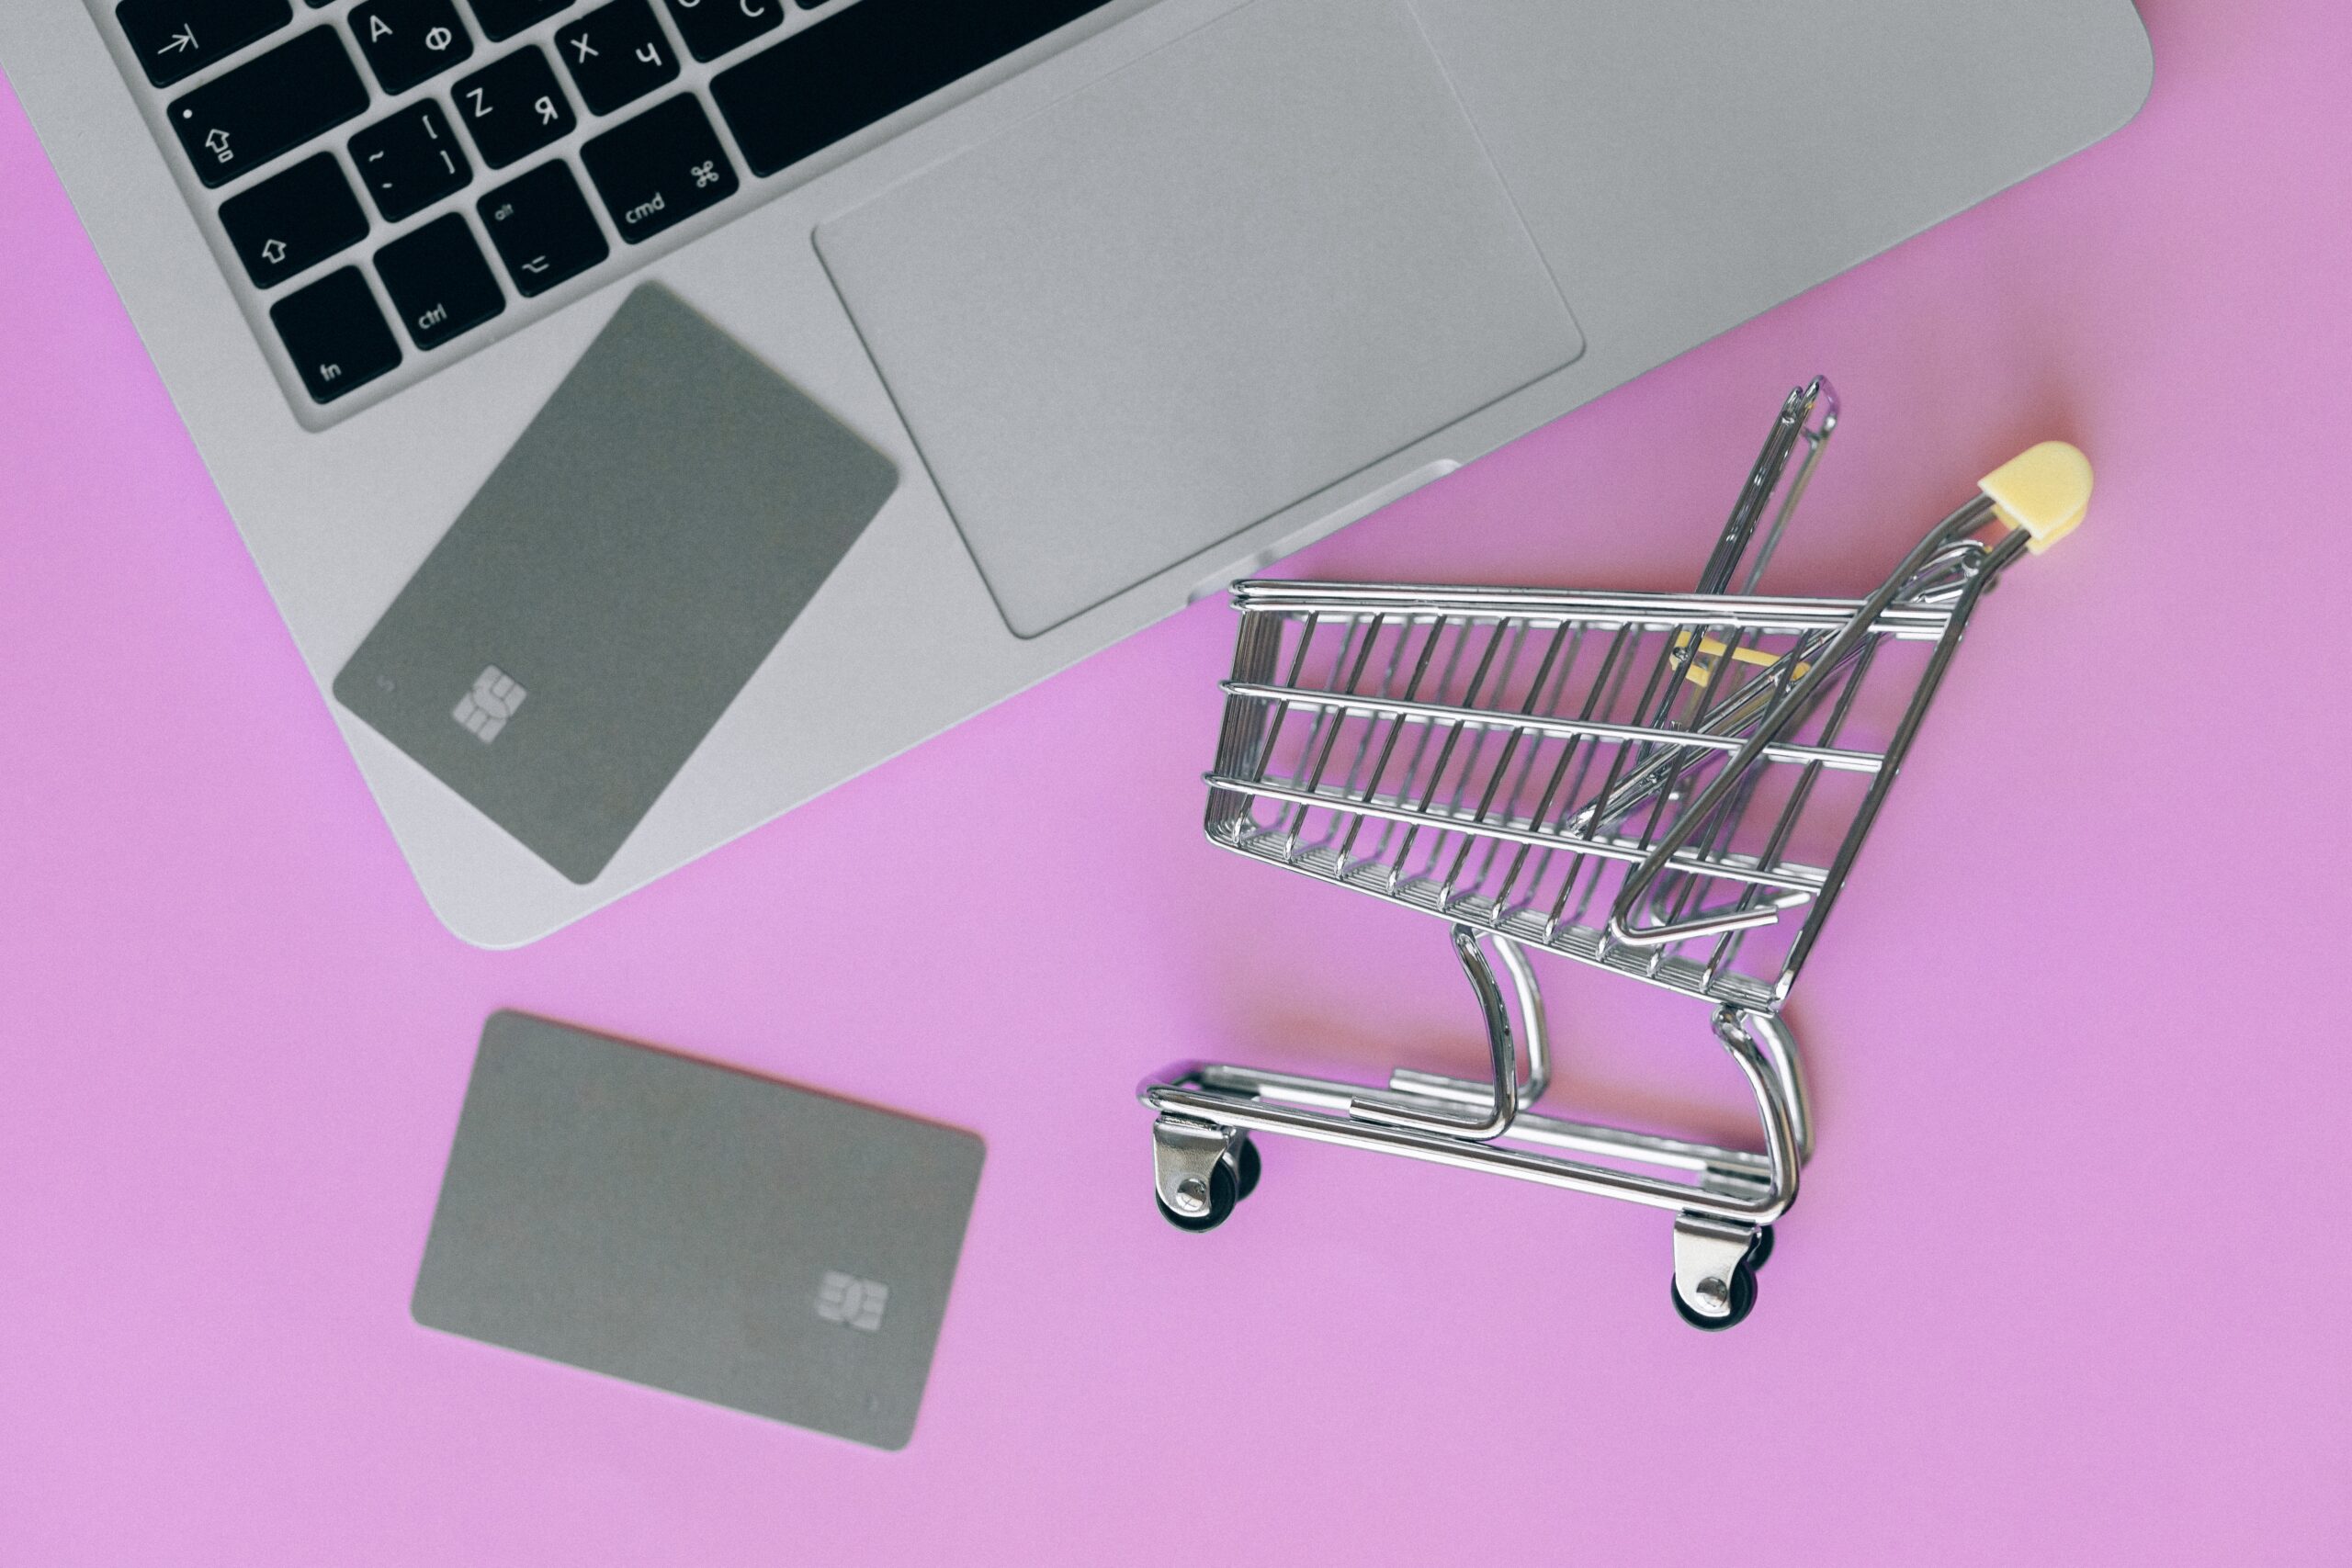 Credit cards and a shopping cart lie next to a laptop